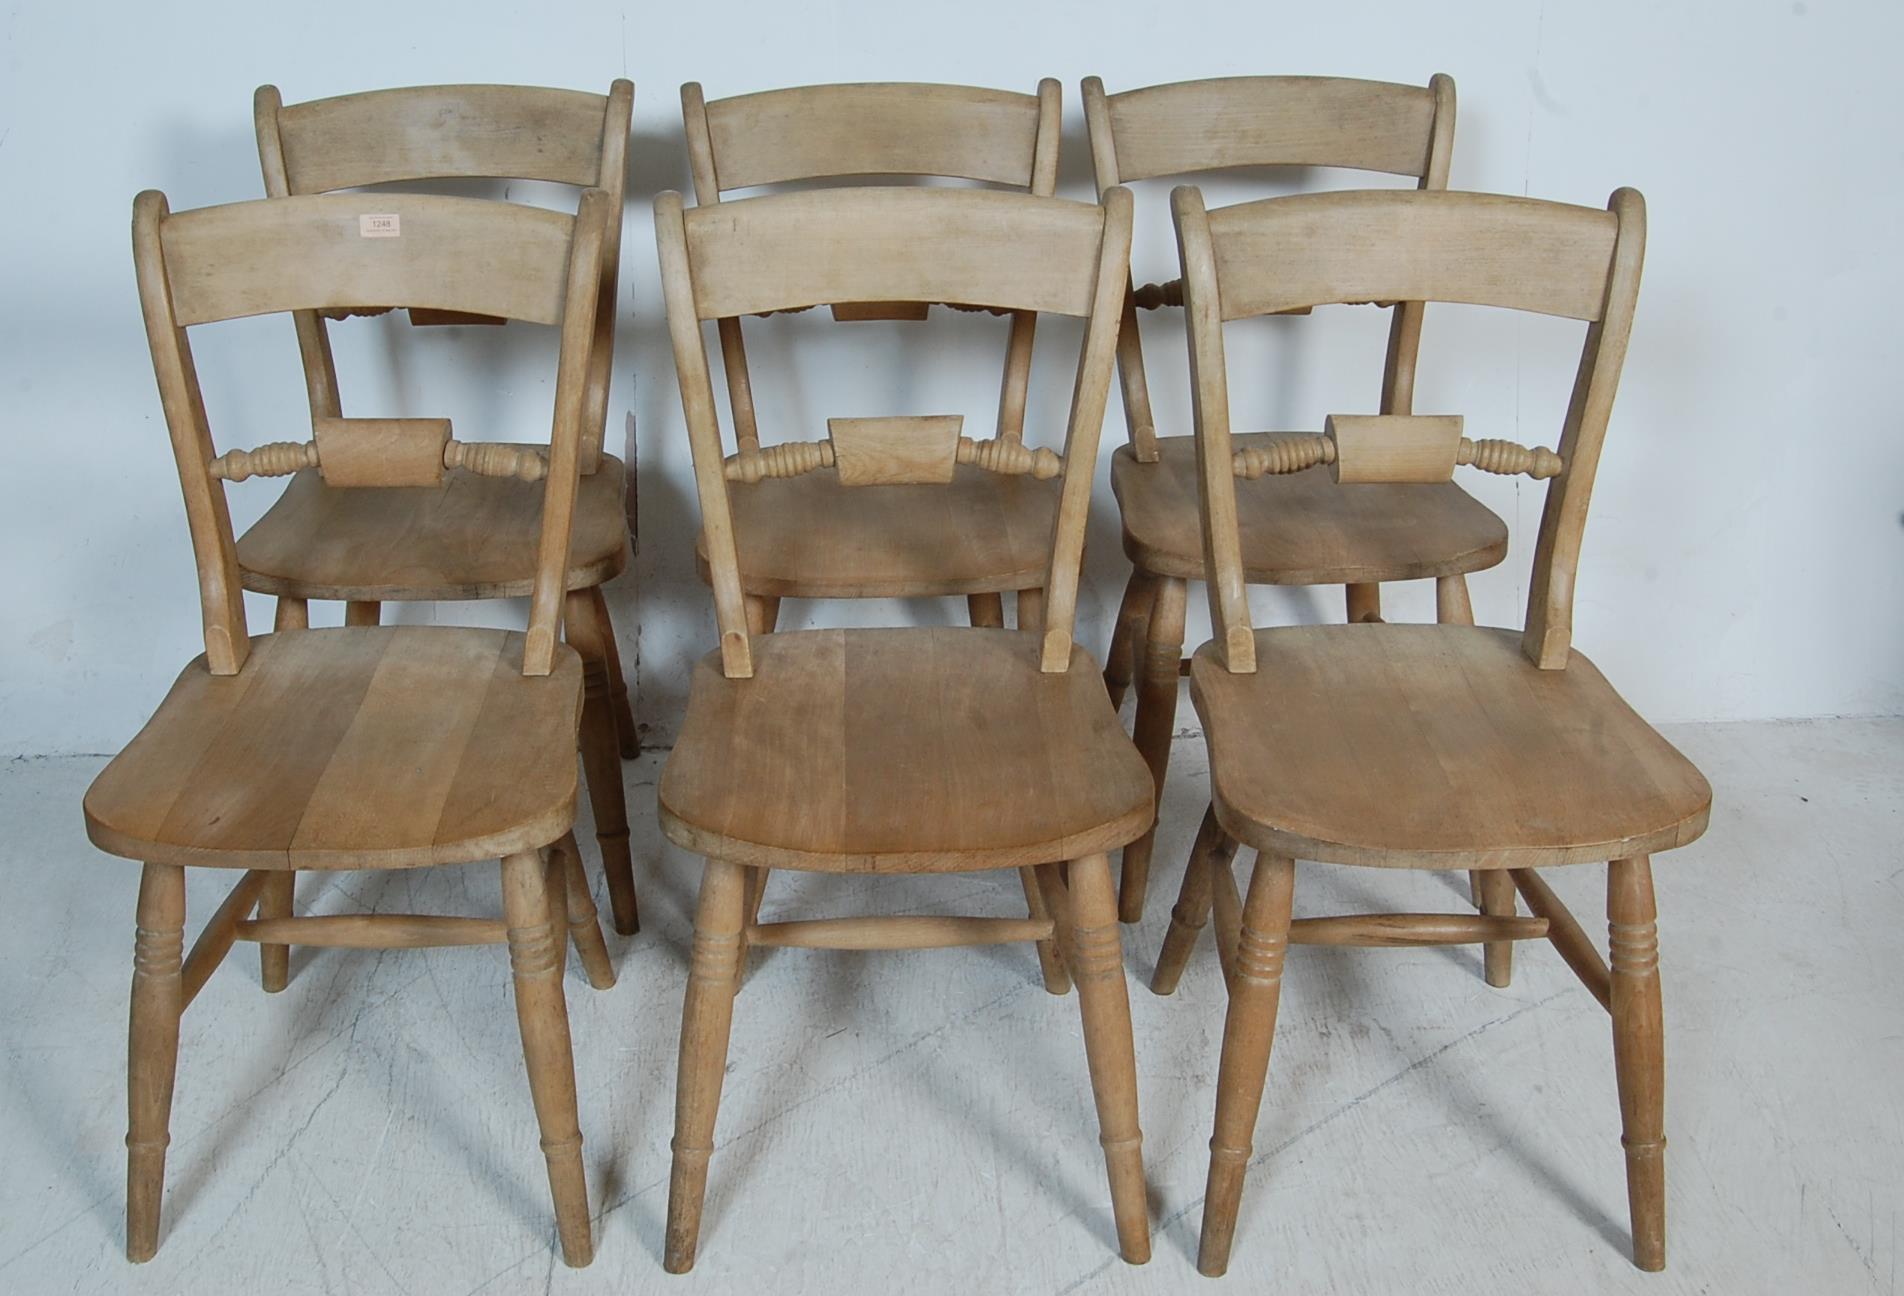 SIX VICTORIAN STYLE DINING CHAIRS - Image 2 of 5